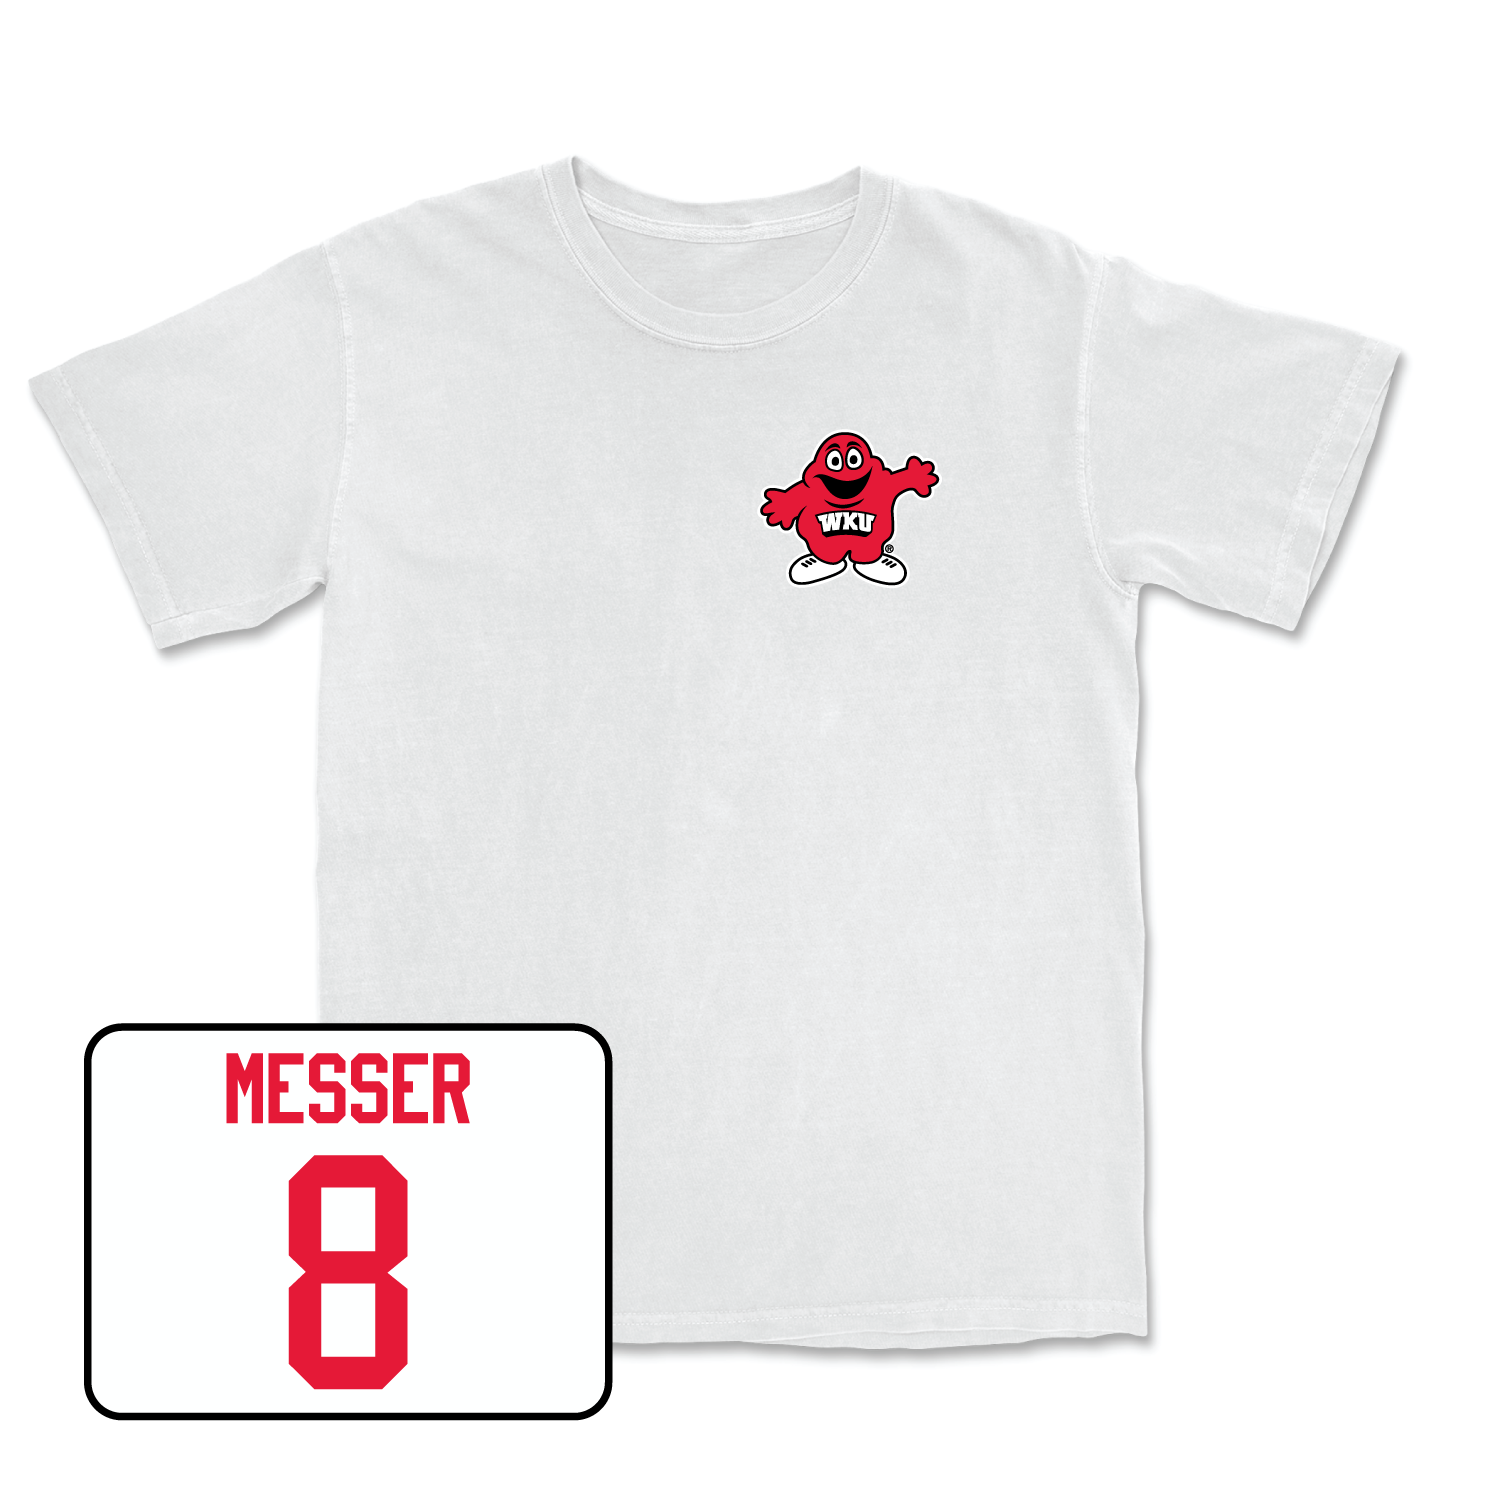 White Football Big Red Comfort Colors Tee 2 4X-Large / Easton Messer | #8